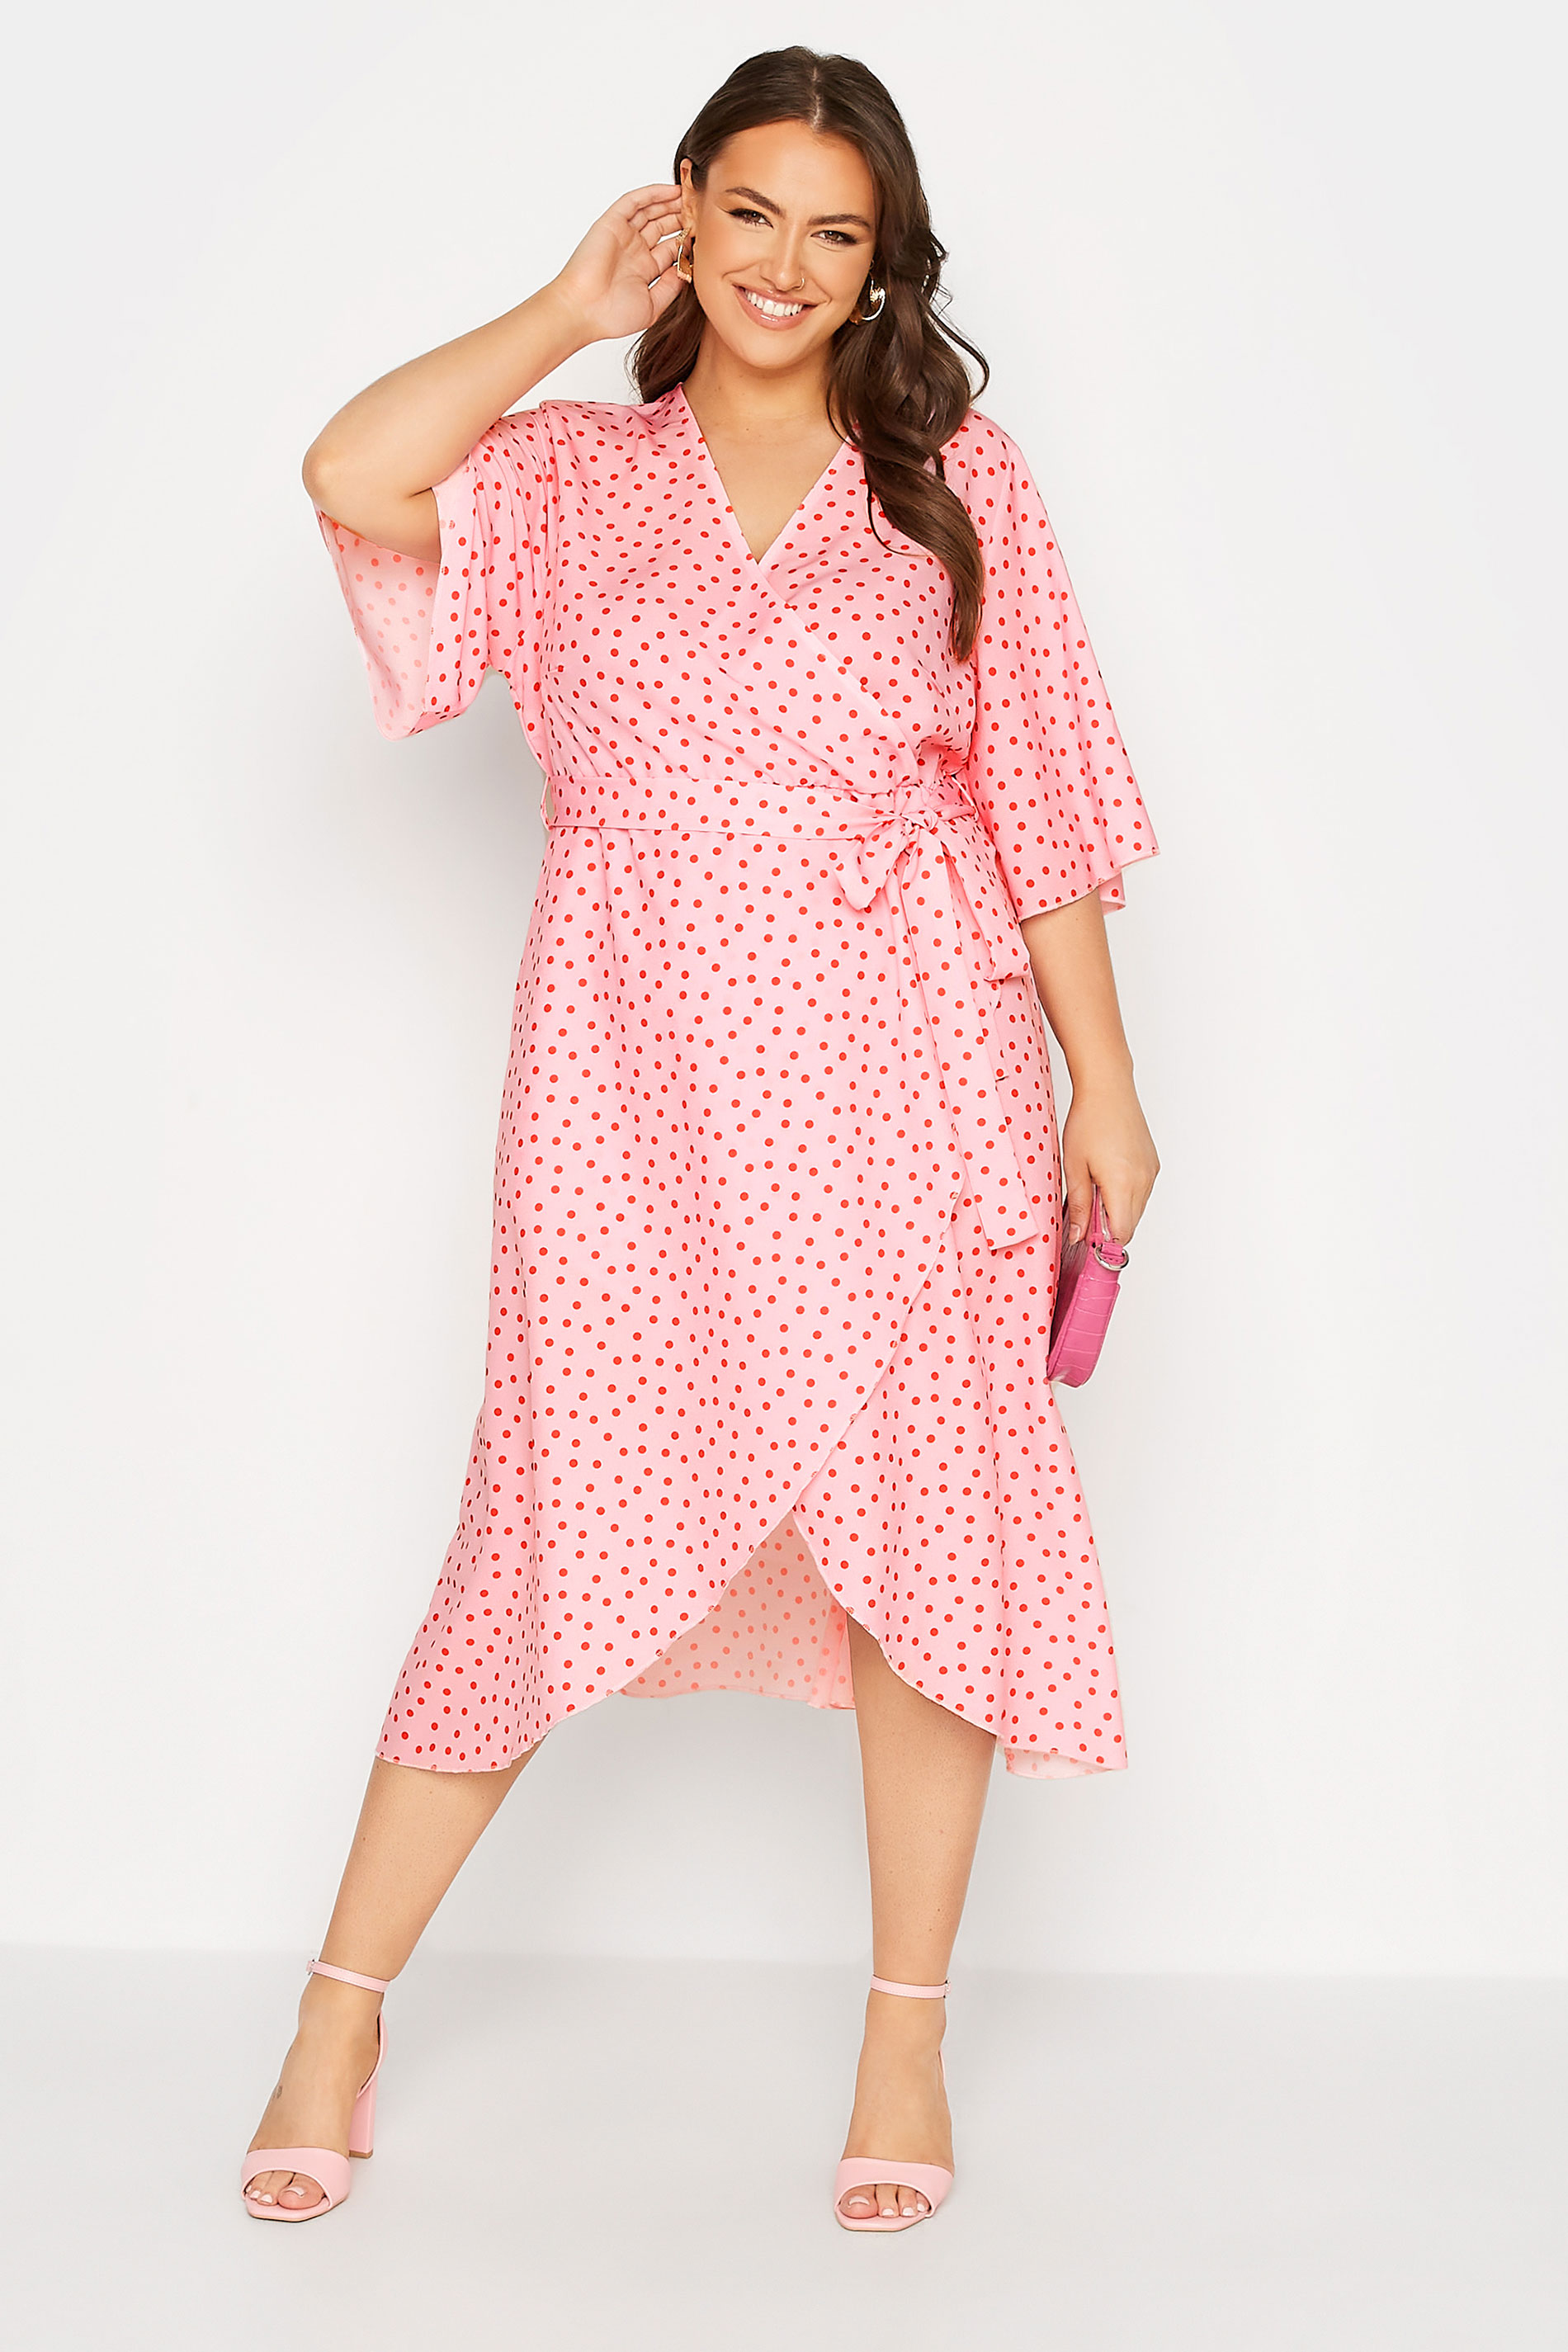 Robes Grande Taille Grande taille  Robes Portefeuilles | YOURS LONDON - Robe Rose à Pois Rouge Style Portefeuille - TP22456